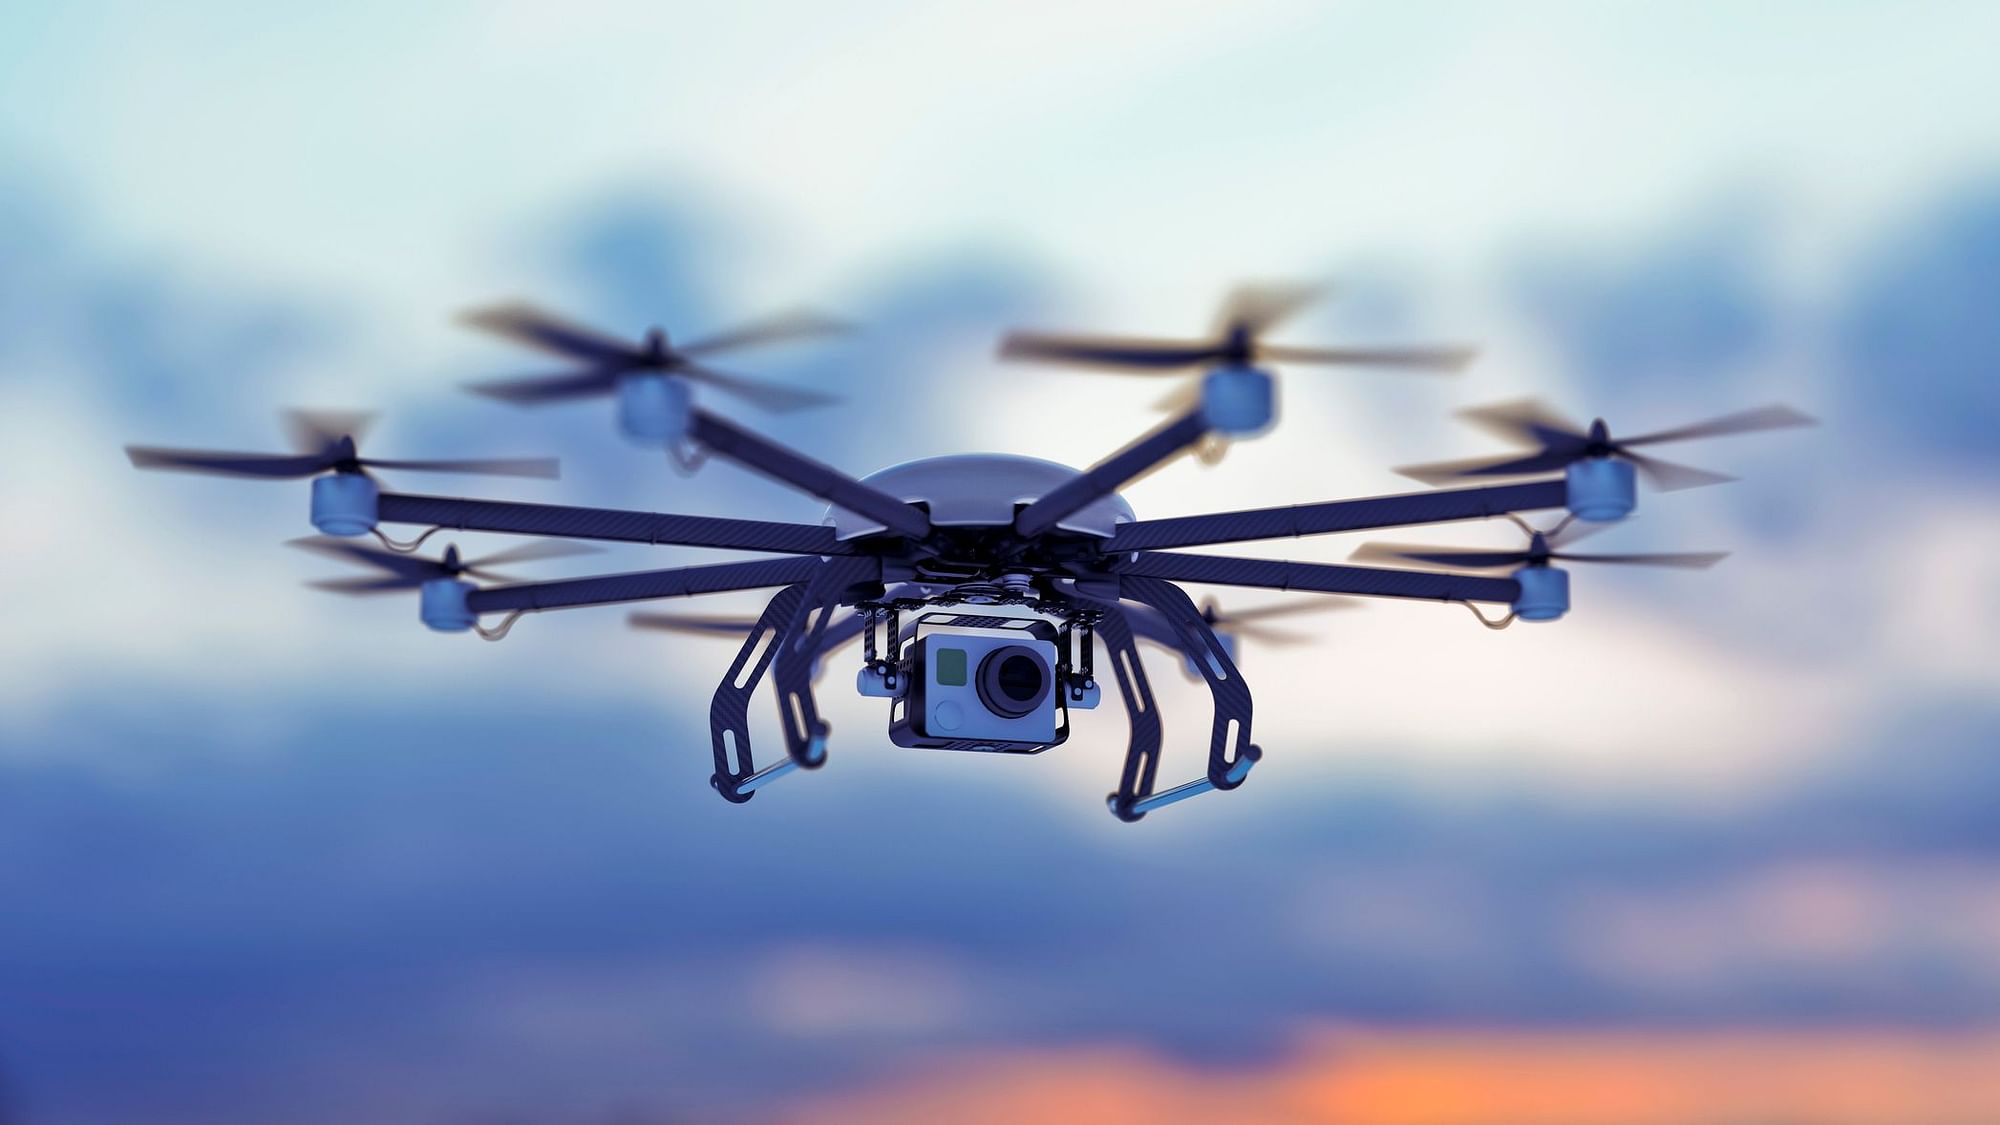 The drones can be equipped with thermal imaging hardware to detect people with high temperature.